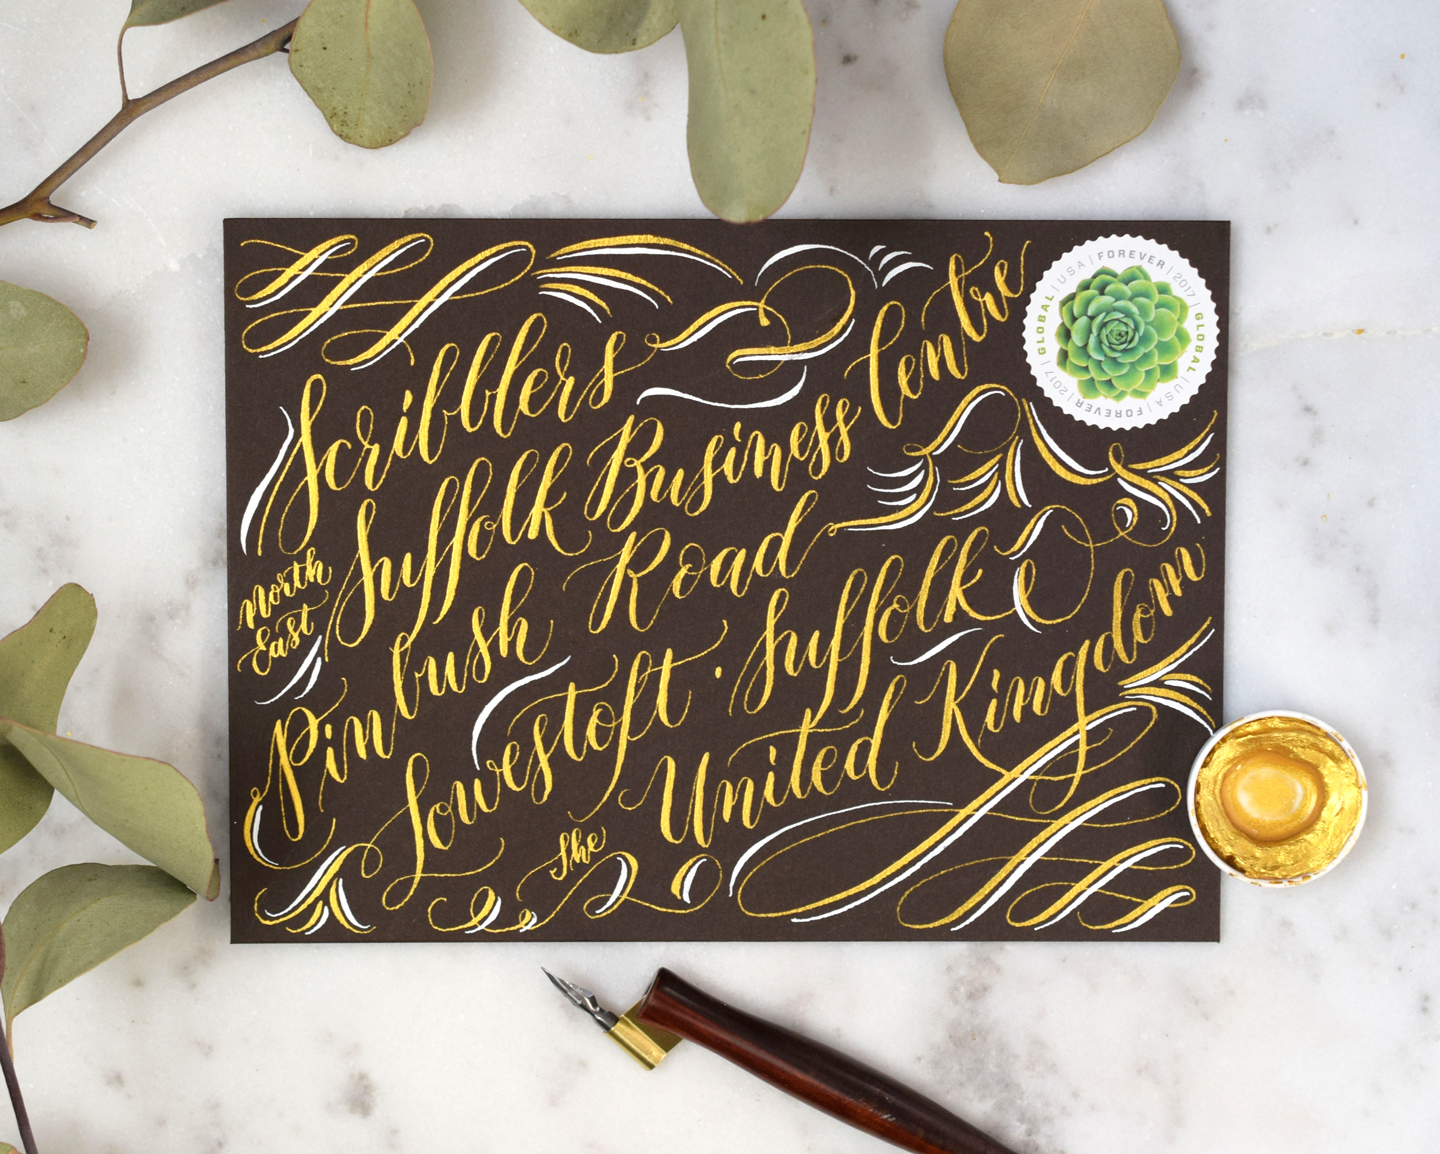 White and Gold Flourished Envelope Calligraphy Tutorial